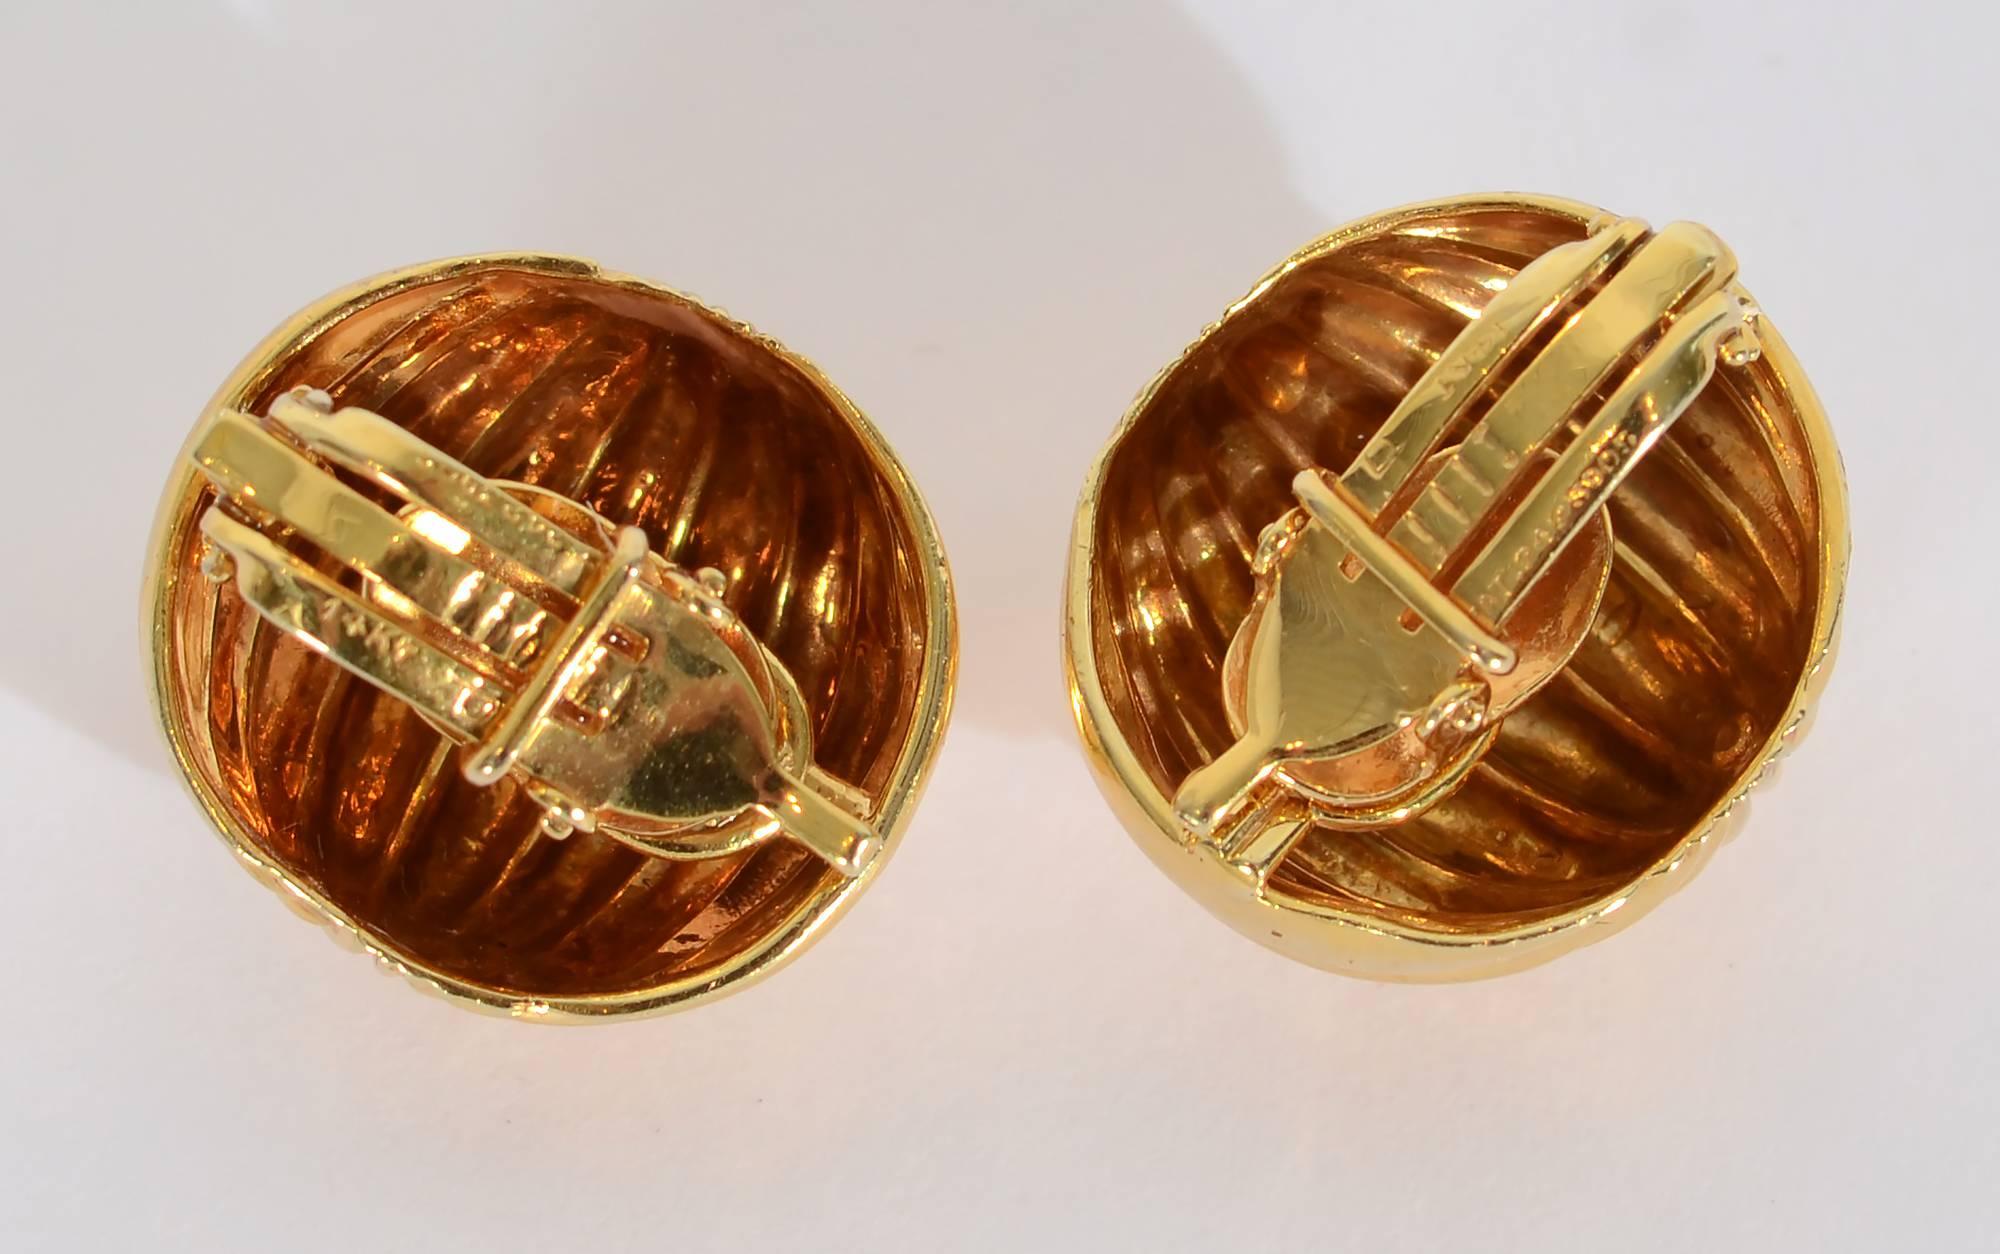 Timeless ribbed gold ear clips in a melon shape. They measure 13/16